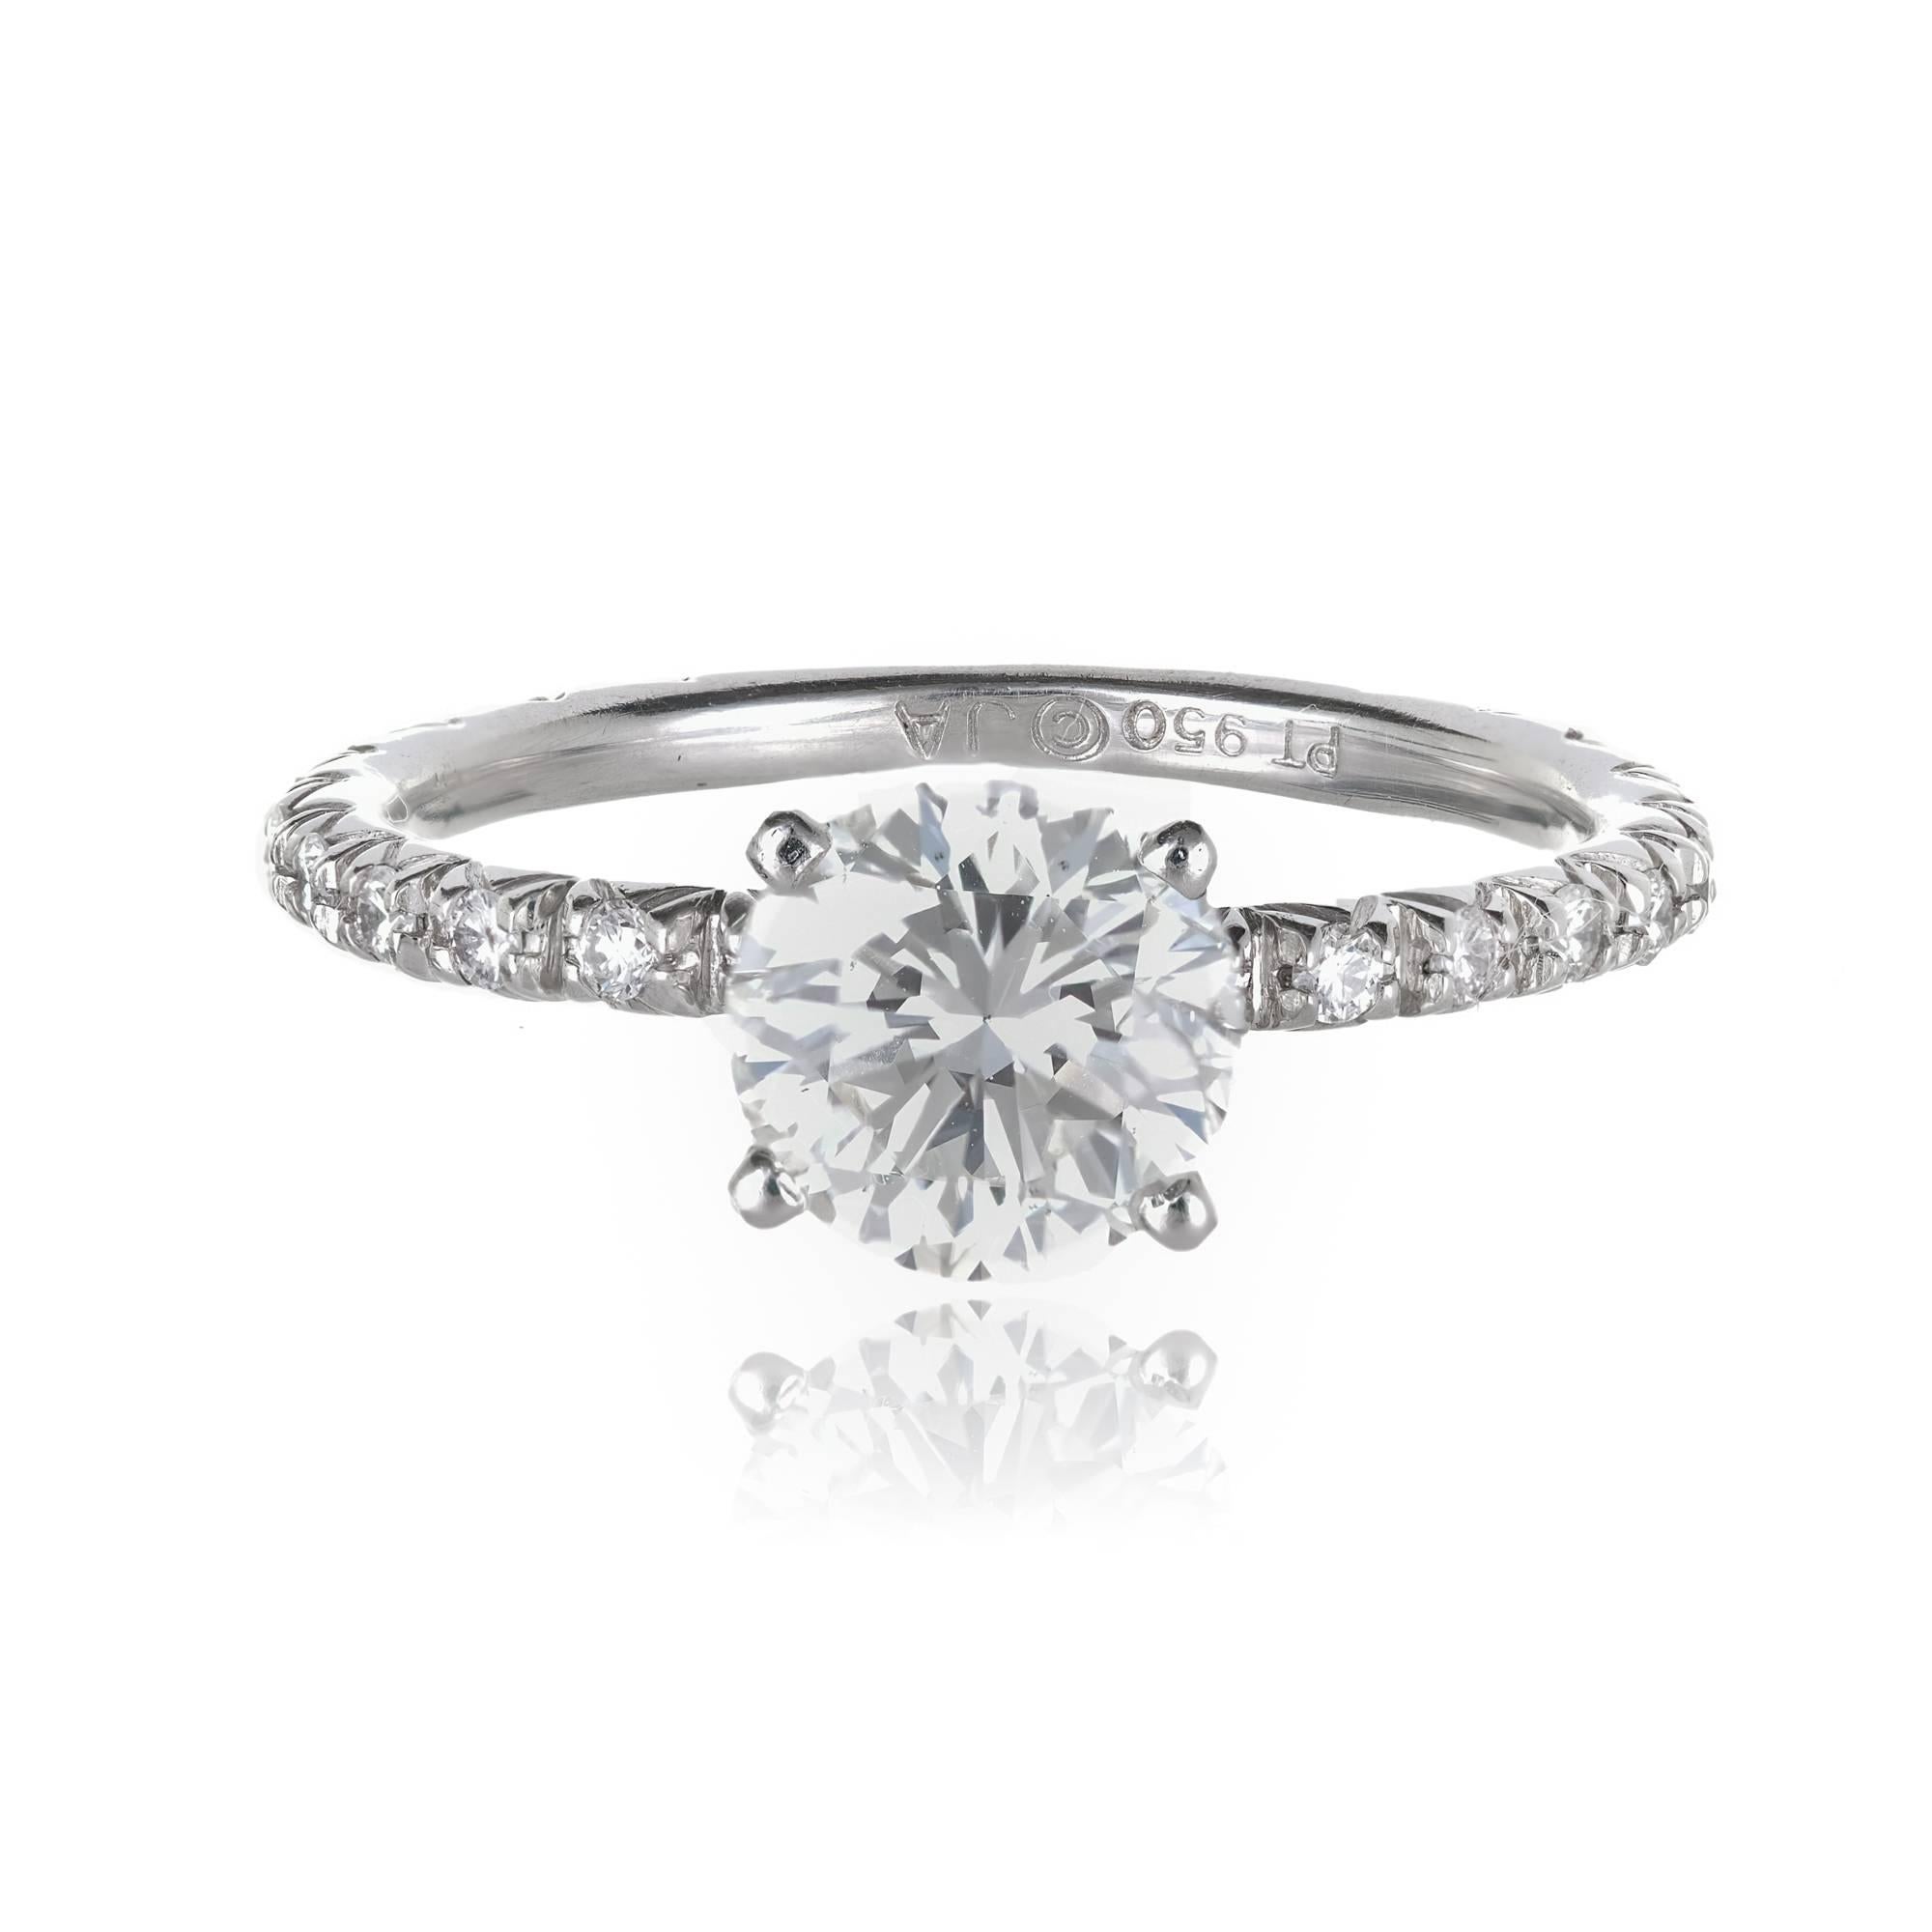 Diamond solitaire engagement ring with sparkly diamonds in a platinum setting. Bright sparkly GIA certified center diamond. 

1 round brilliant cut diamonds, approx. total weight 1.02cts, I, SI2, 6.30 x 6.34 x 4.29mm, GIA certificate#2165138861
20